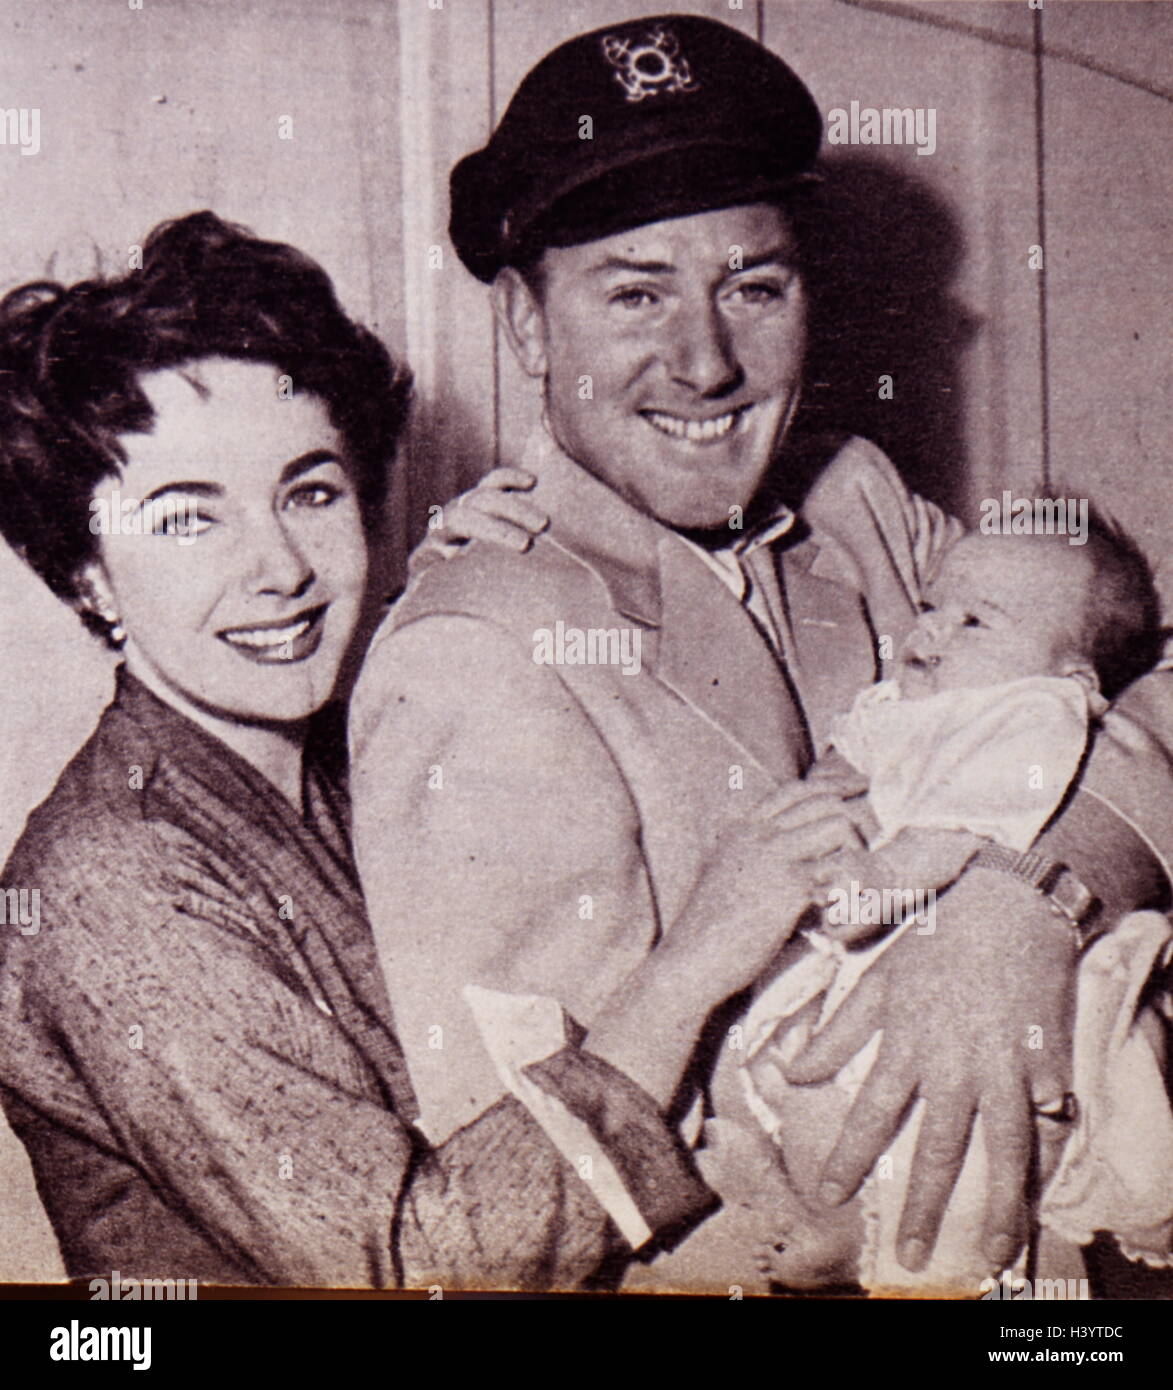 Photograph of Michael Wilding (1912-1979) his wife Elizabeth Taylor (1932-2011) and their infant son Christopher Edward Wilding (1955-). Dated 20th Century Stock Photo